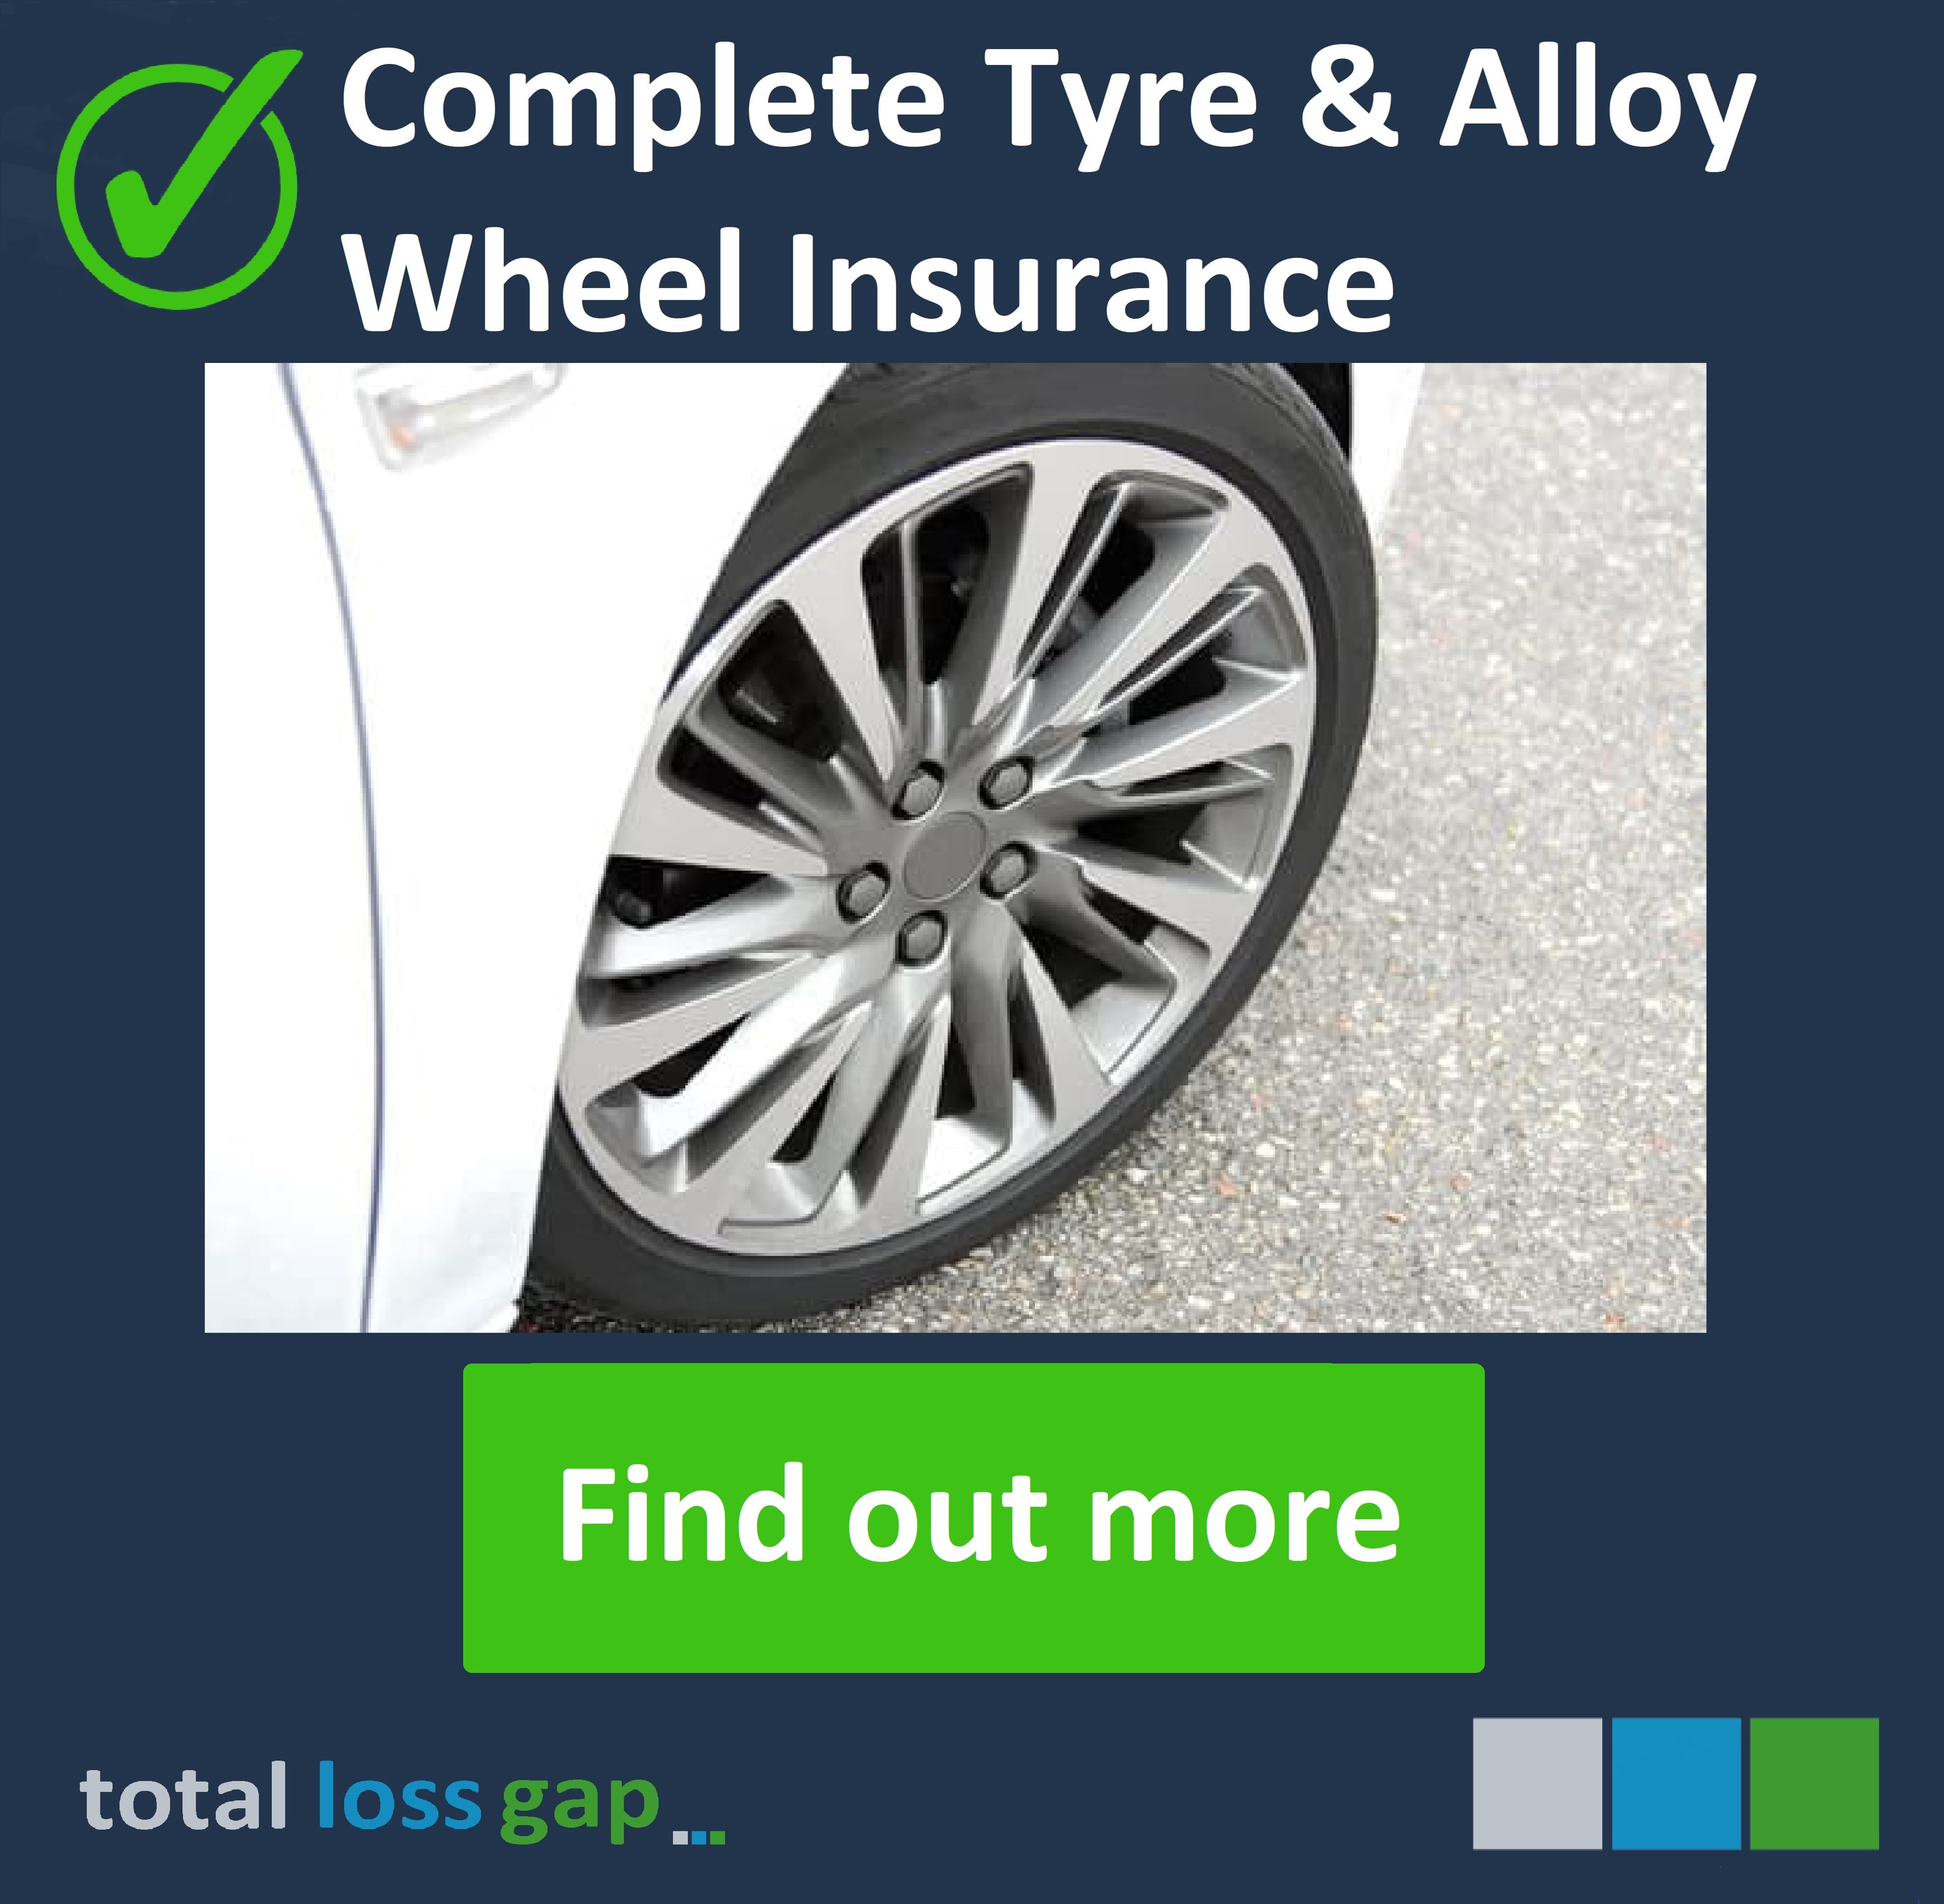 Find out more about Tyre & Alloy cover